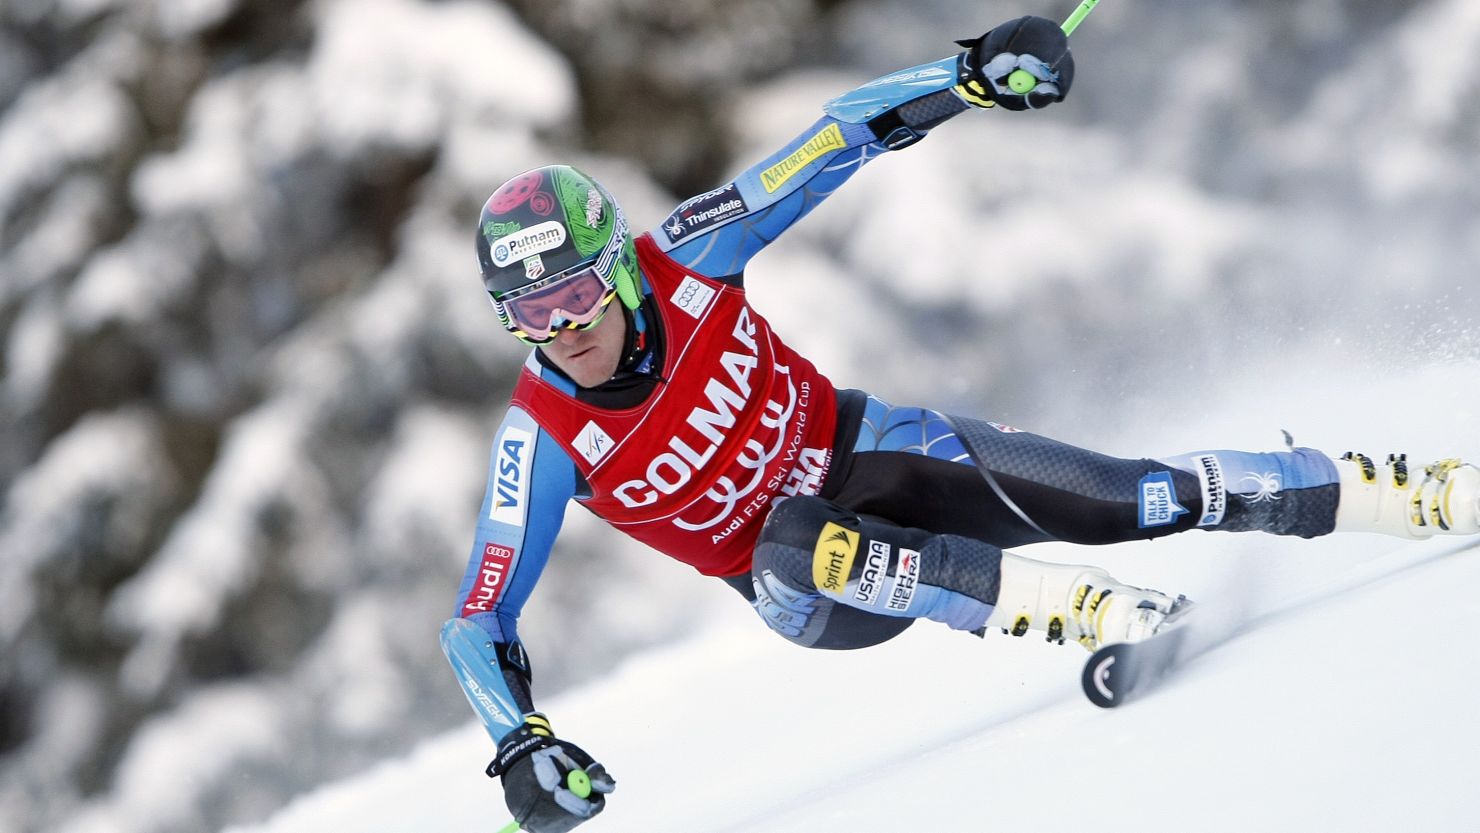 U.S. star Ted Ligety won the men's World Cup giant slalom at Alta Badia following another fine performance.